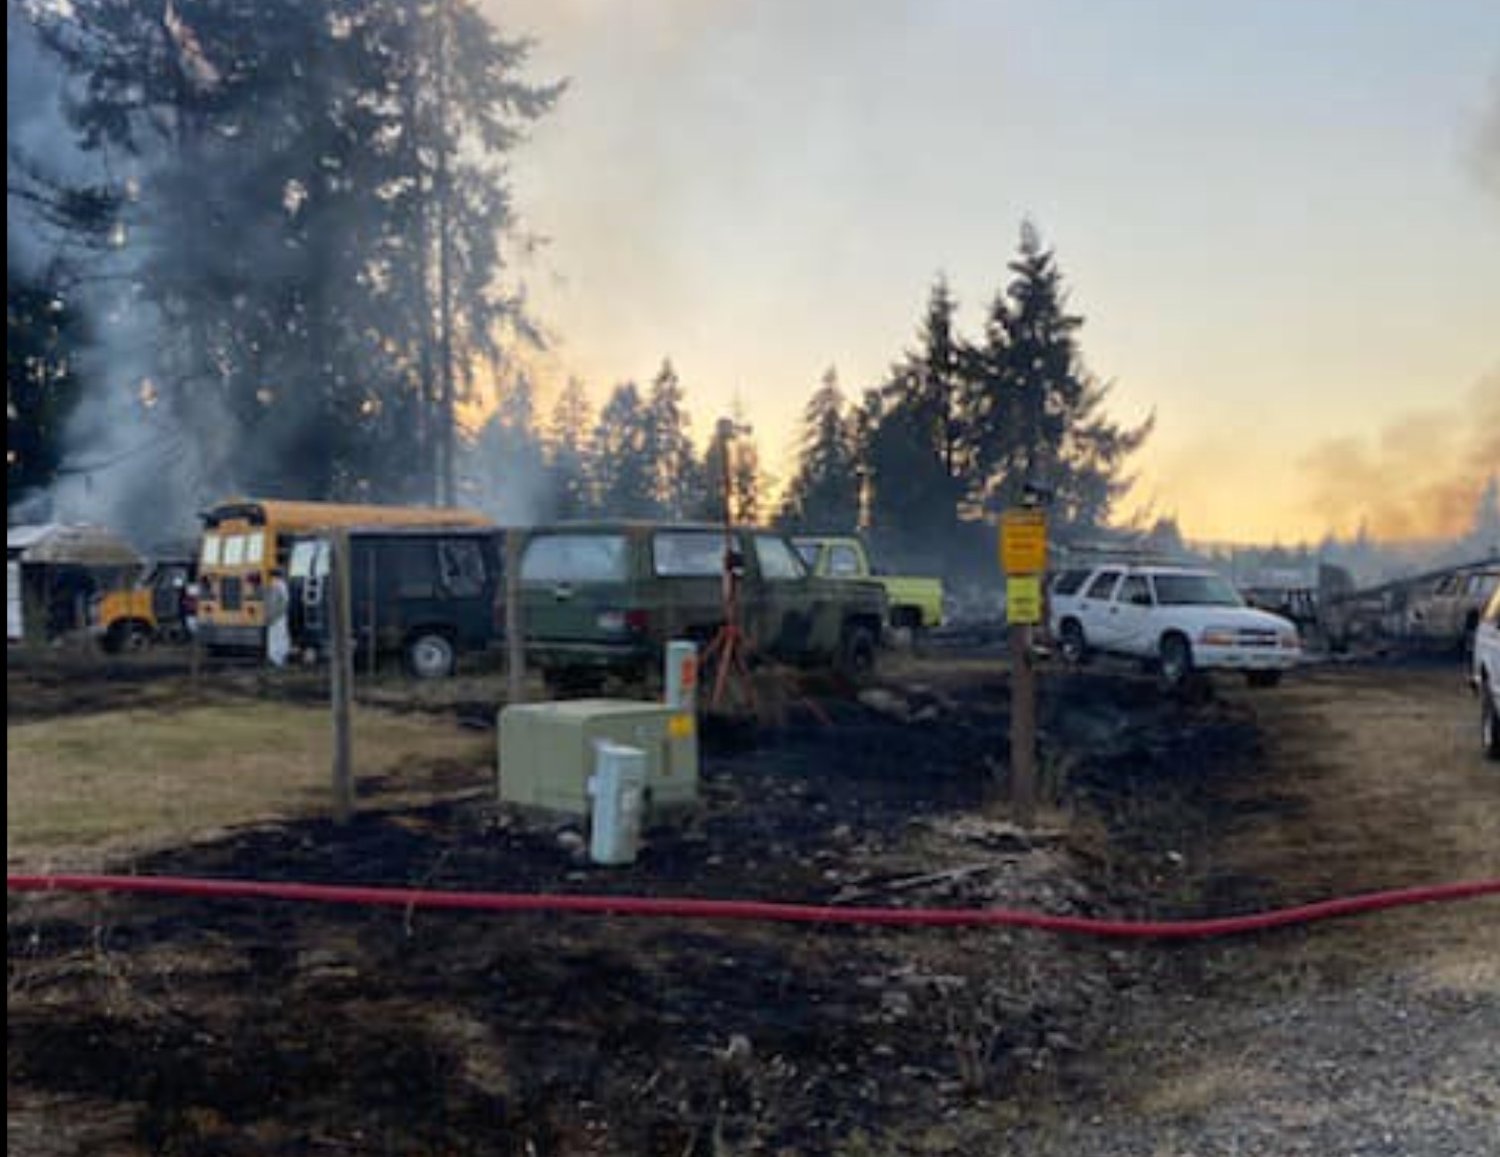 The West Thurston Fire Authority reported Saturday night that a blaze that once threatened to consume 35 structures and 30 vehicles in Rochester ended up burning one primary residence, an outbuilding and 20 vehicles before being contained. 